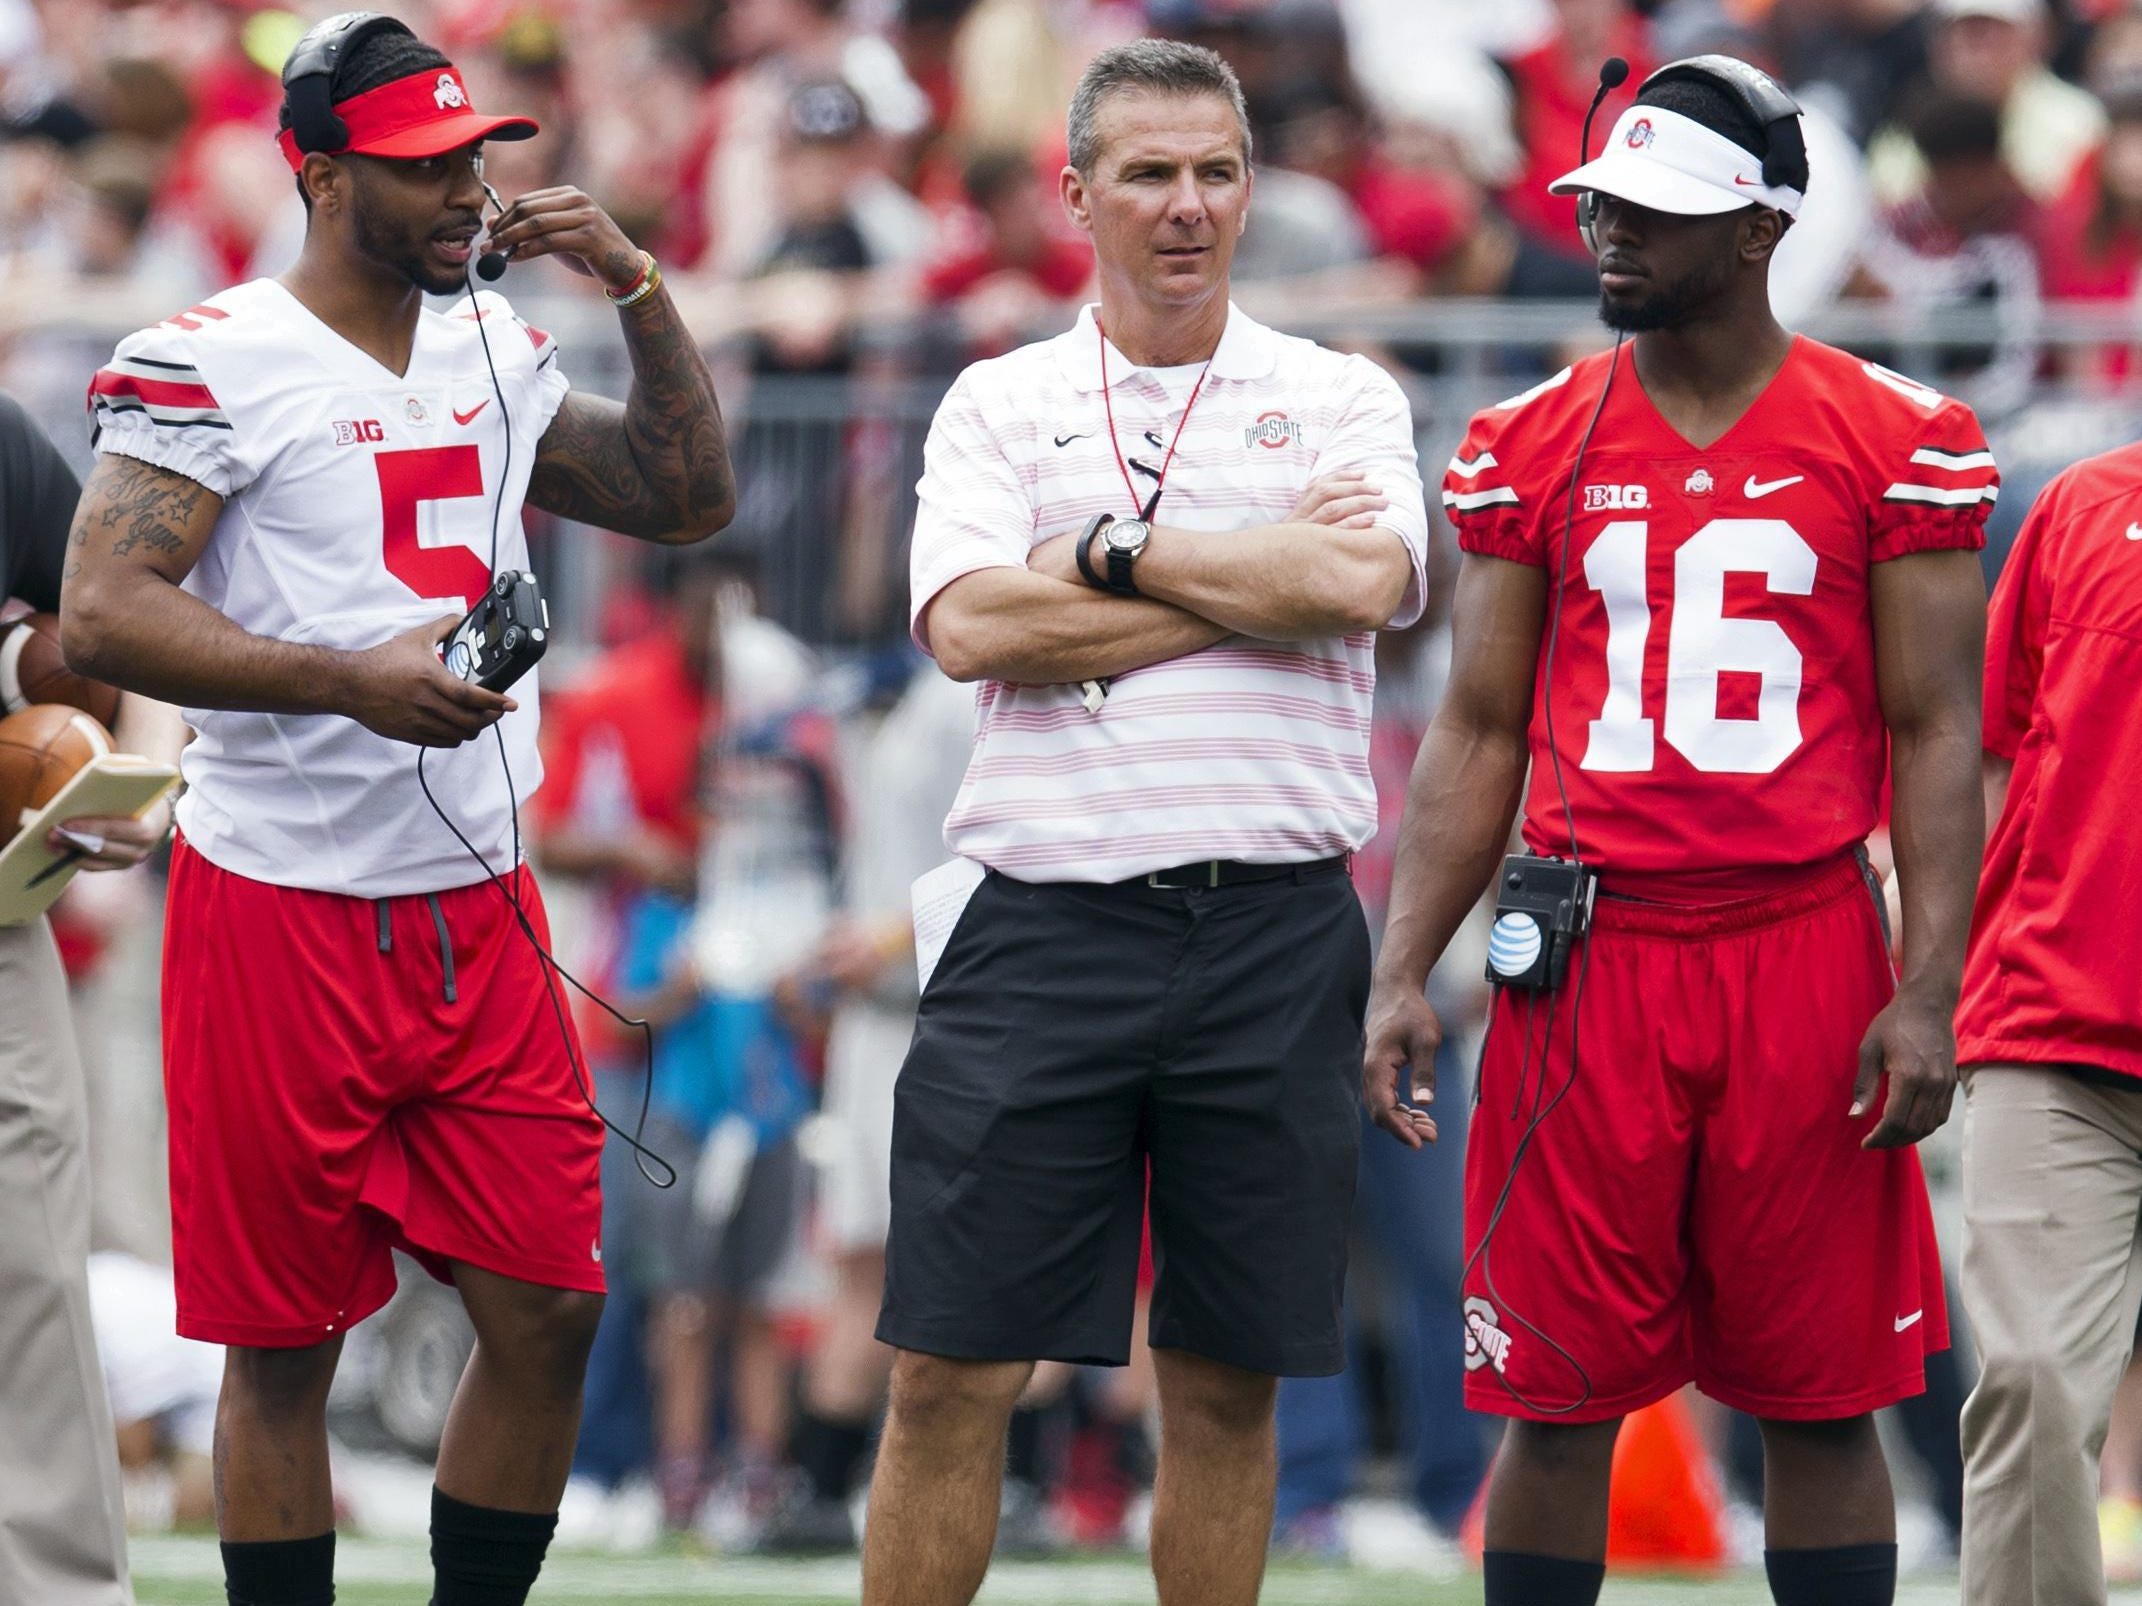 Ohio State coach Urban Meyer is flanked by Braxton Miller and J.T. Barrett at this year’s spring game. Miller is switching from quarterback to receiver after a second surgery on his throwing shoulder.